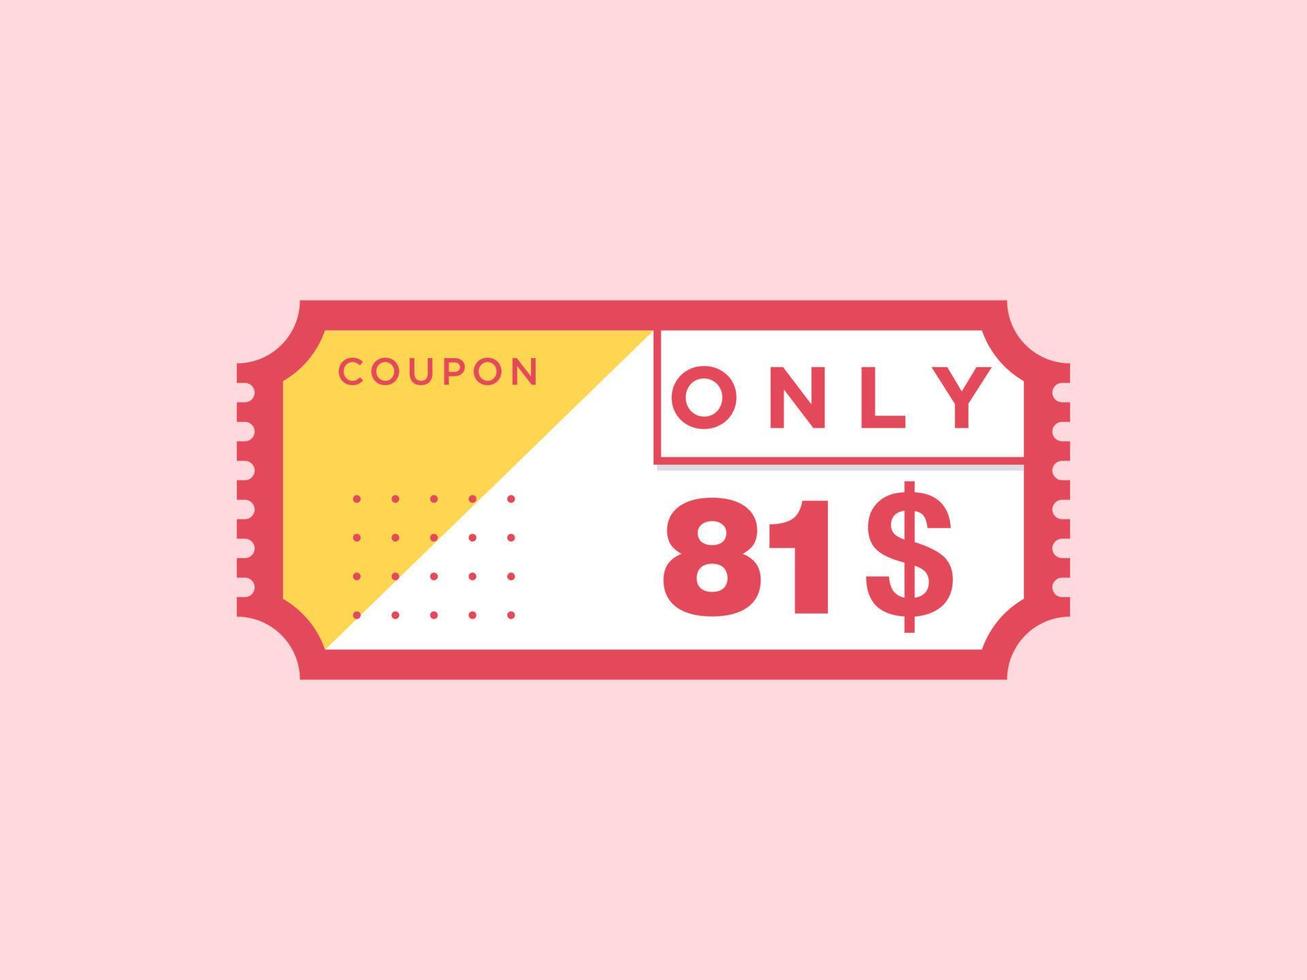 81 Dollar Only Coupon sign or Label or discount voucher Money Saving label, with coupon vector illustration summer offer ends weekend holiday